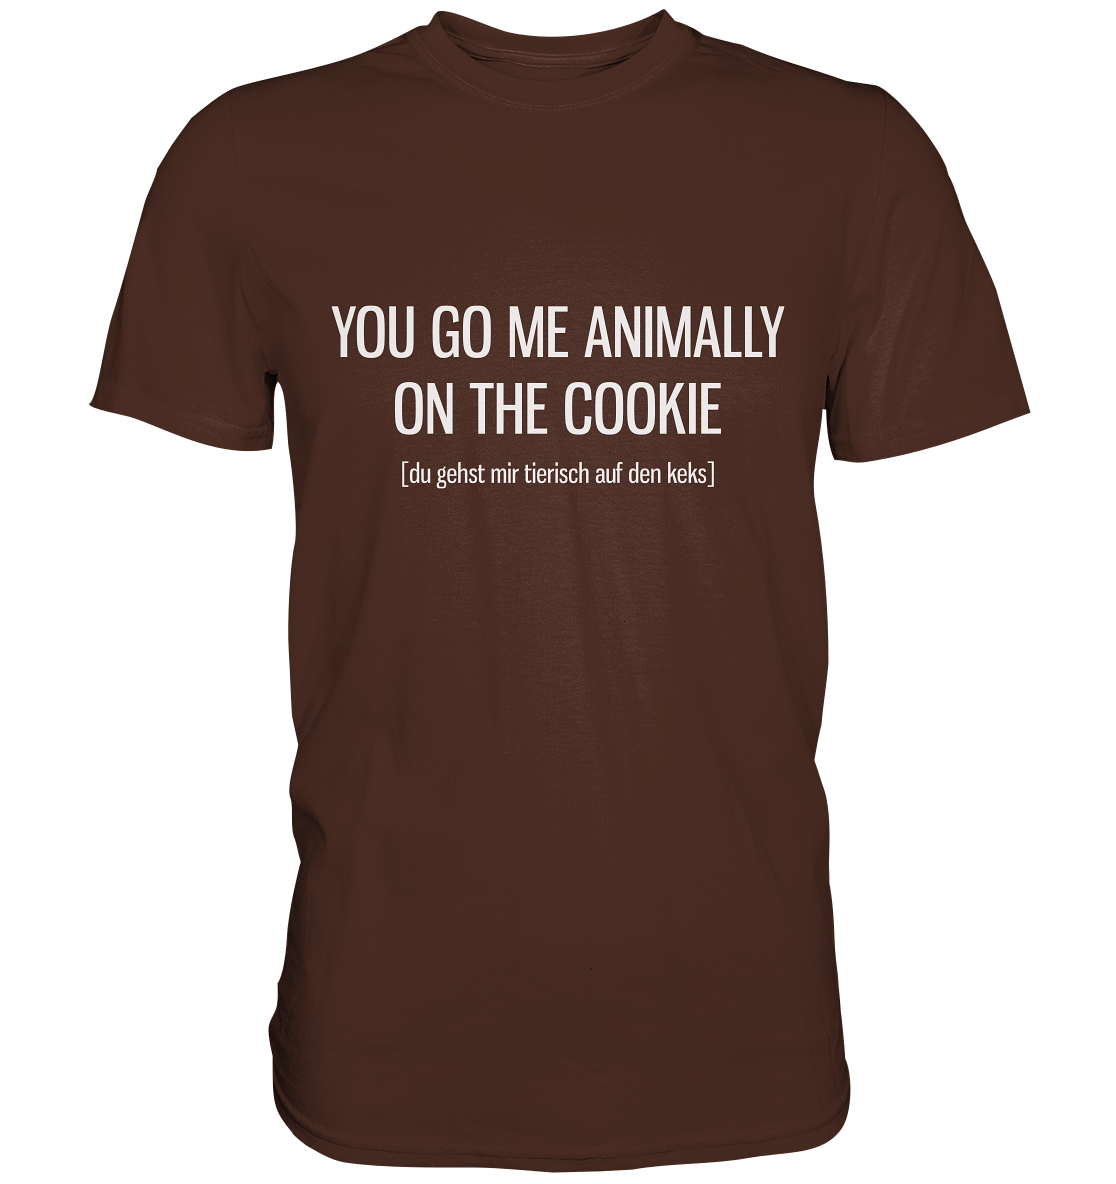 You go me animally on the cookie. Englisch - Unisex Premium Shirt